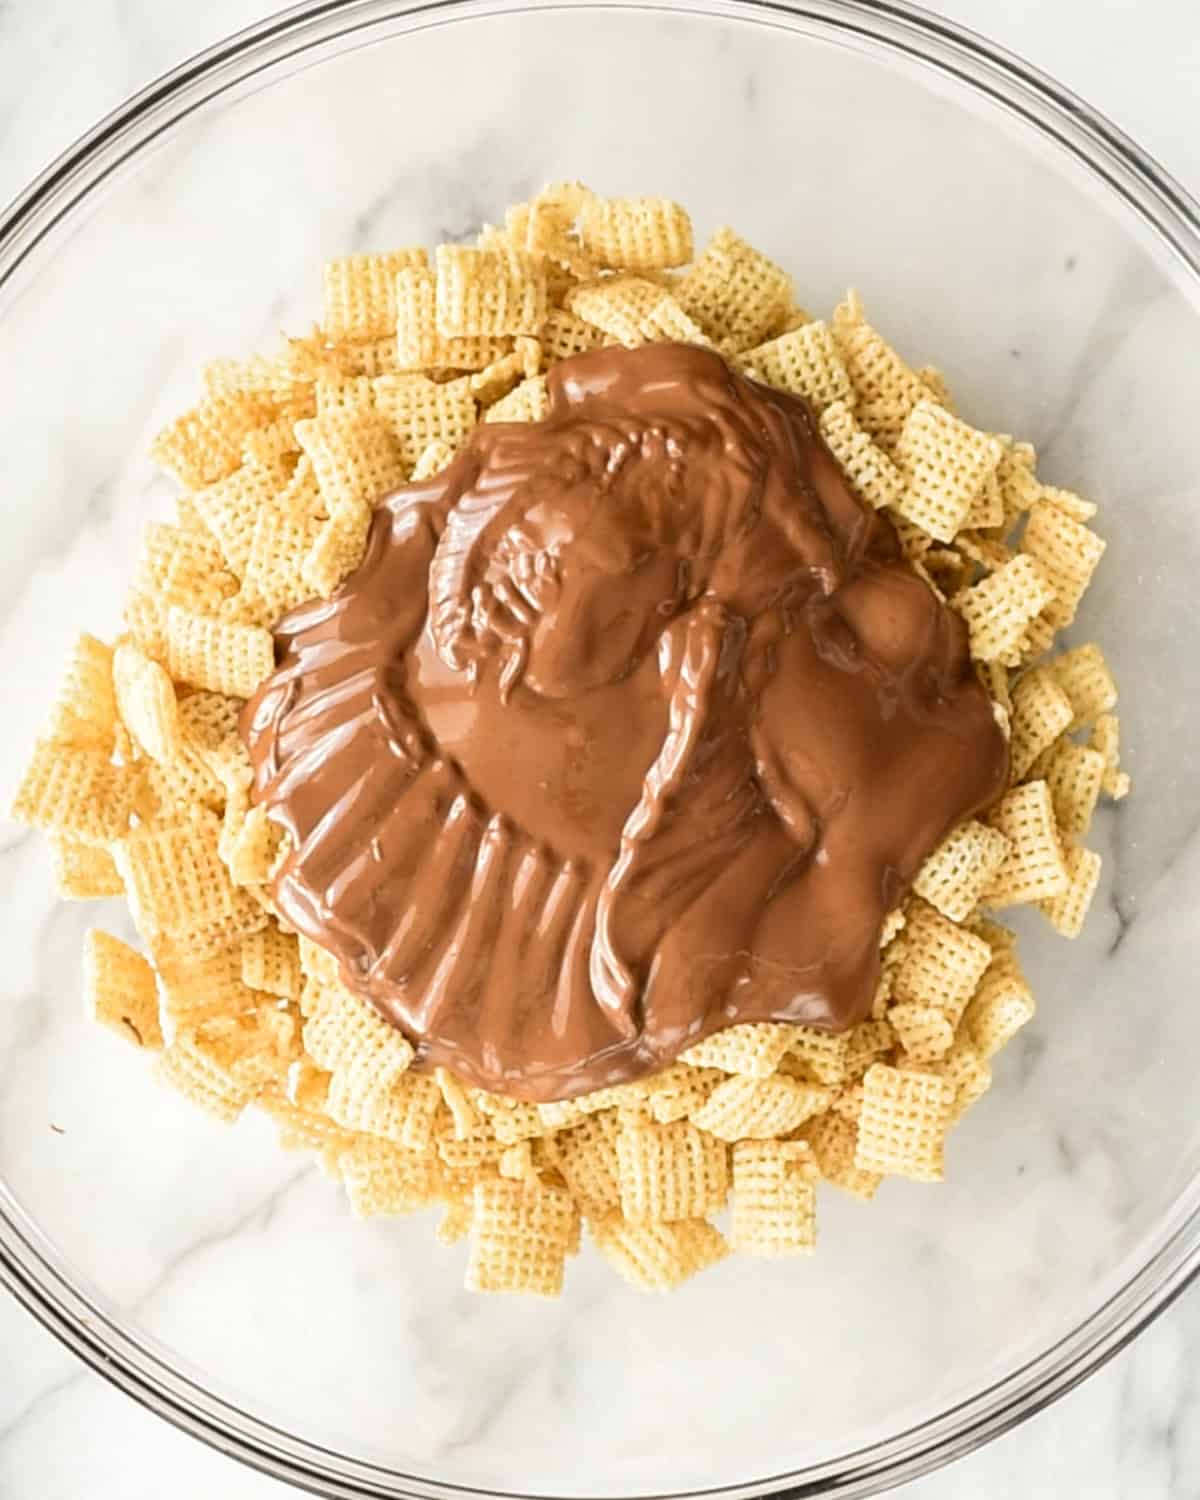 how to make dark chocolate puppy chow - melted chocolate added to chex cereal in a bowl